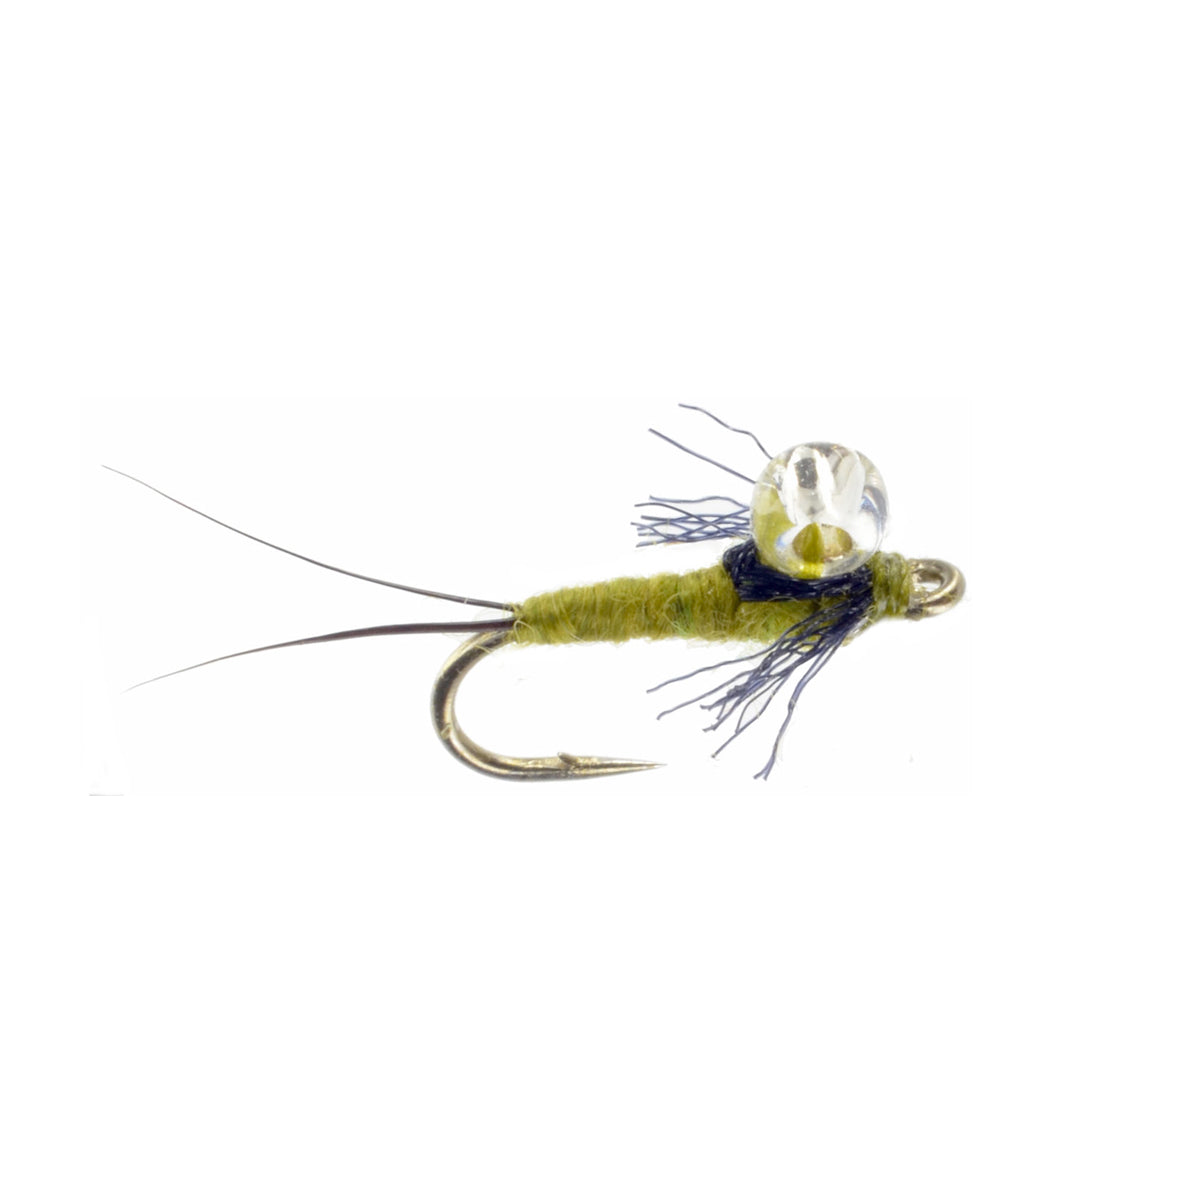 Bead Wing Emerger